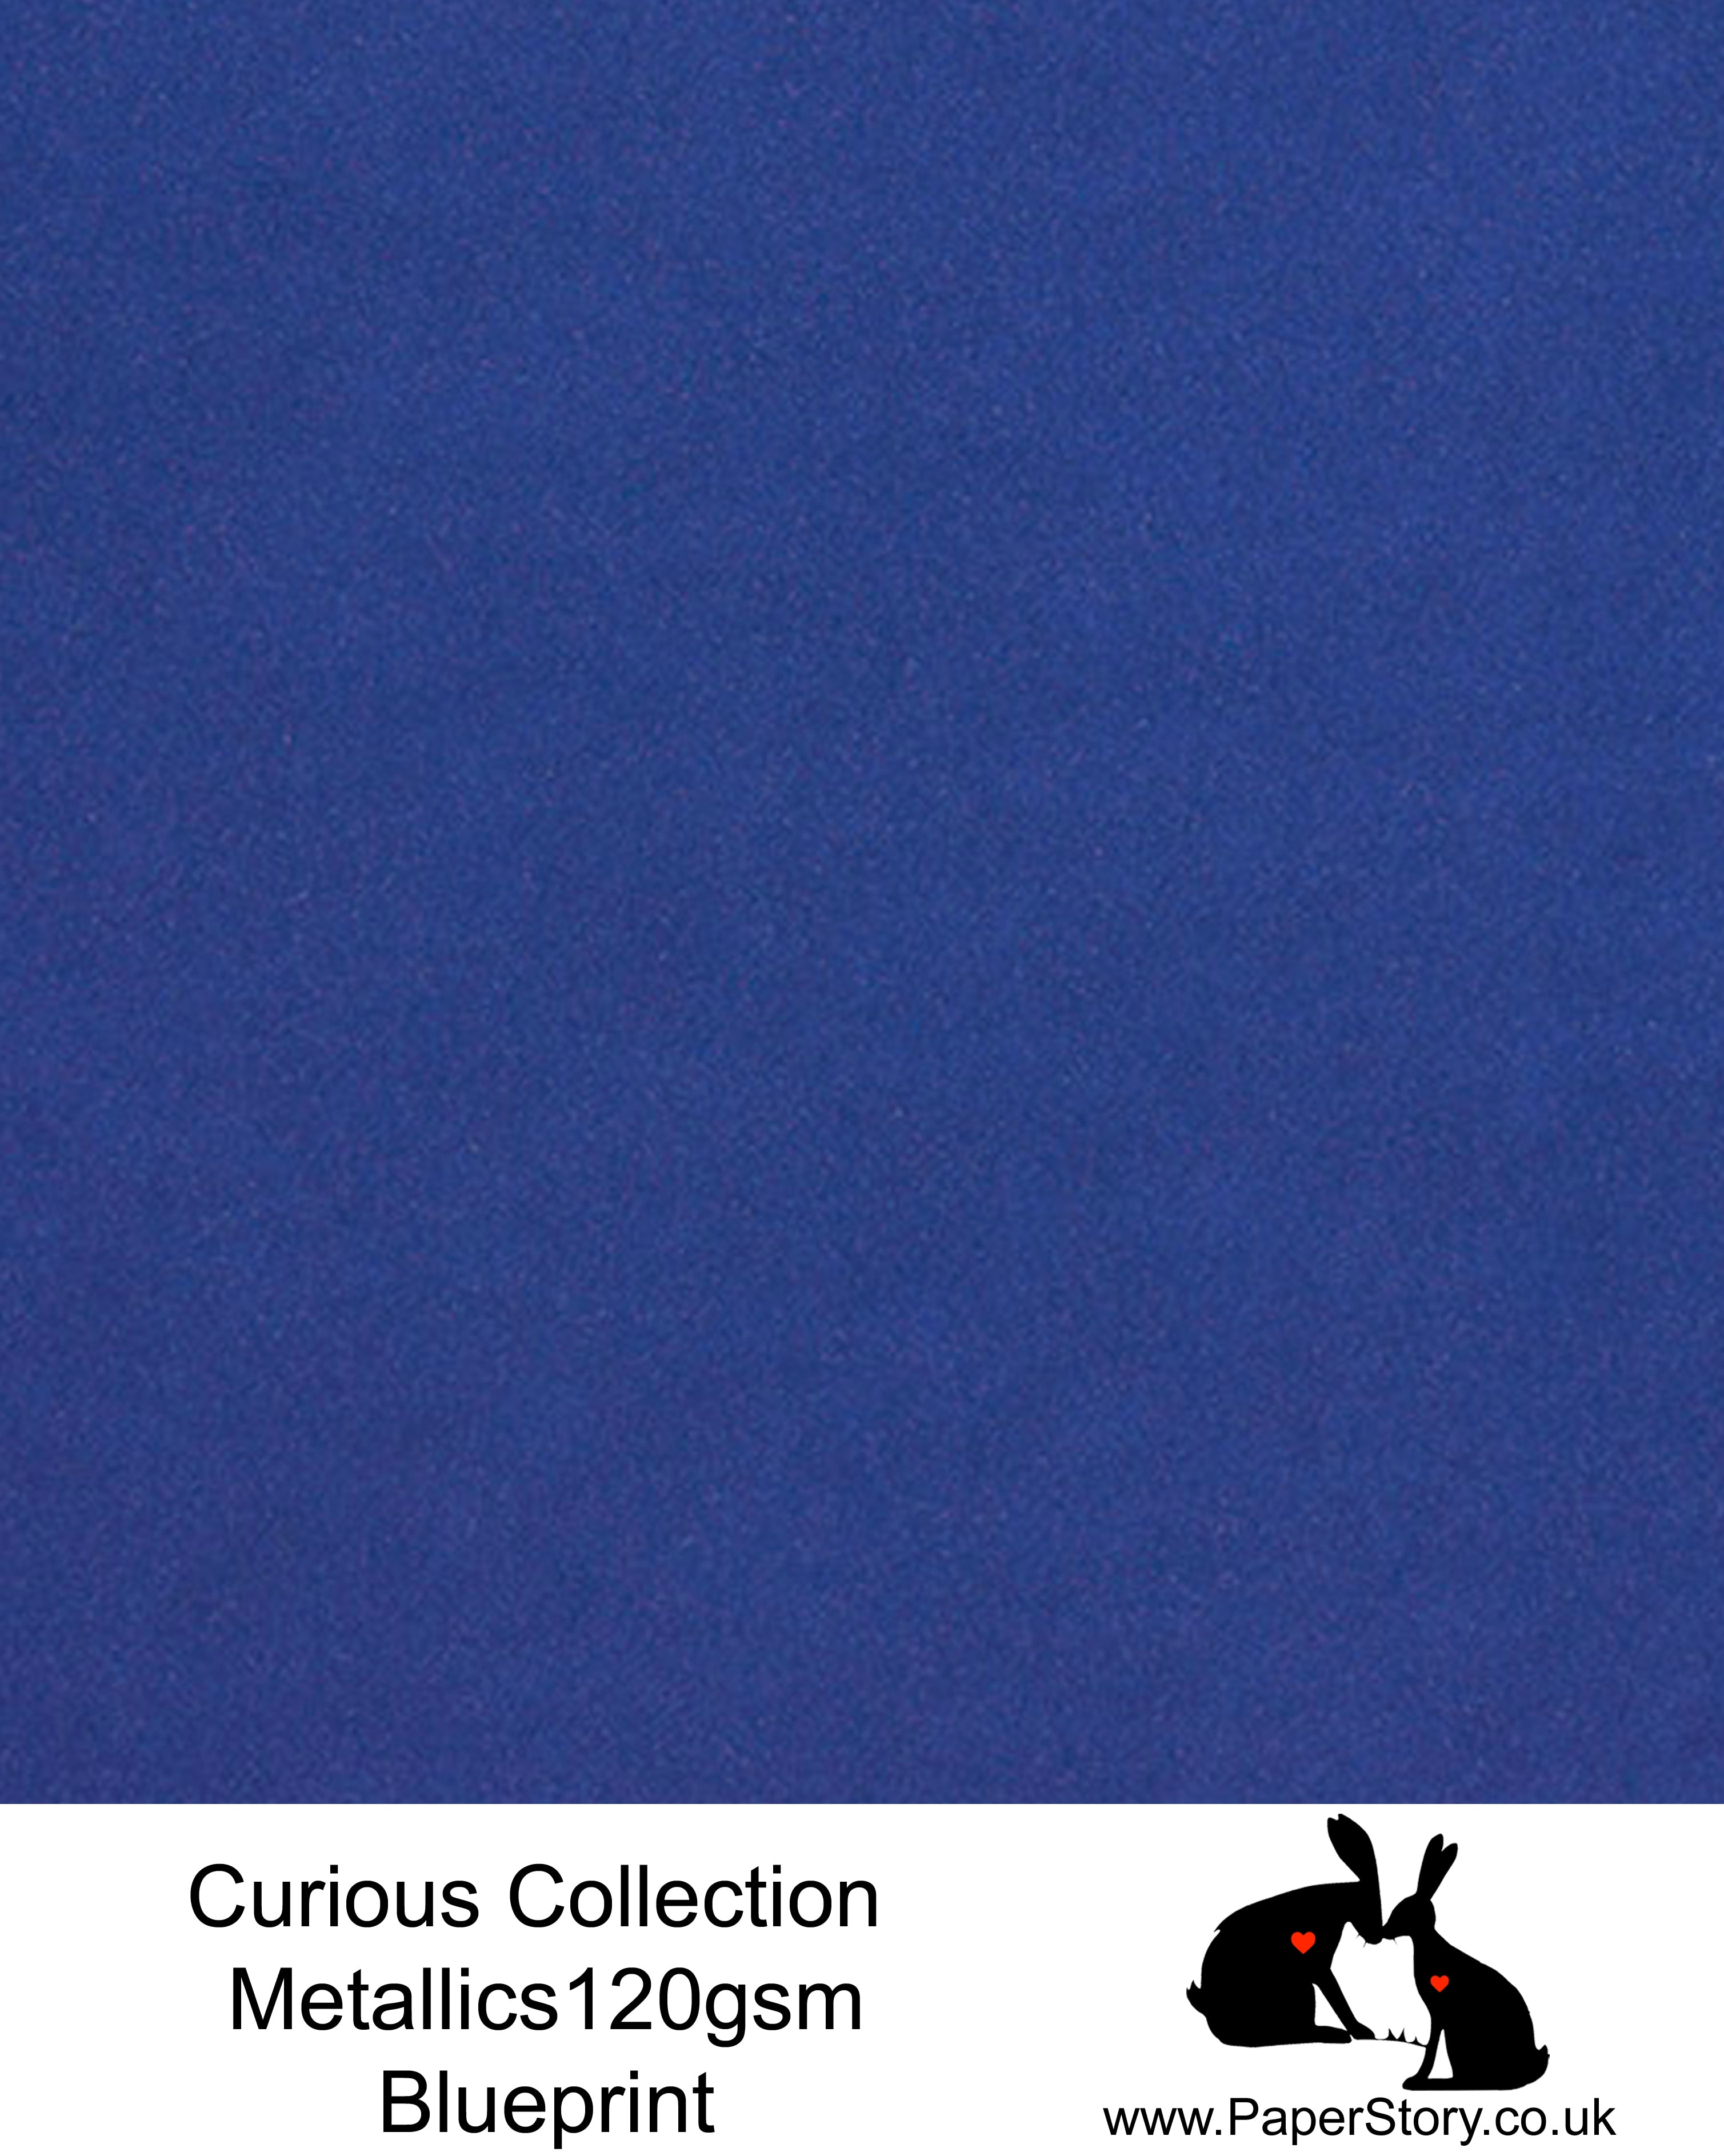 Curious Collection Curious Metallics. Blueprint is now a rare find, stunning bright blue. This unique metallic paper is unlike any other metallic shimmer surface, the natural underlying wove surface of Curious Metallics enhances the stunning metallic shimmer